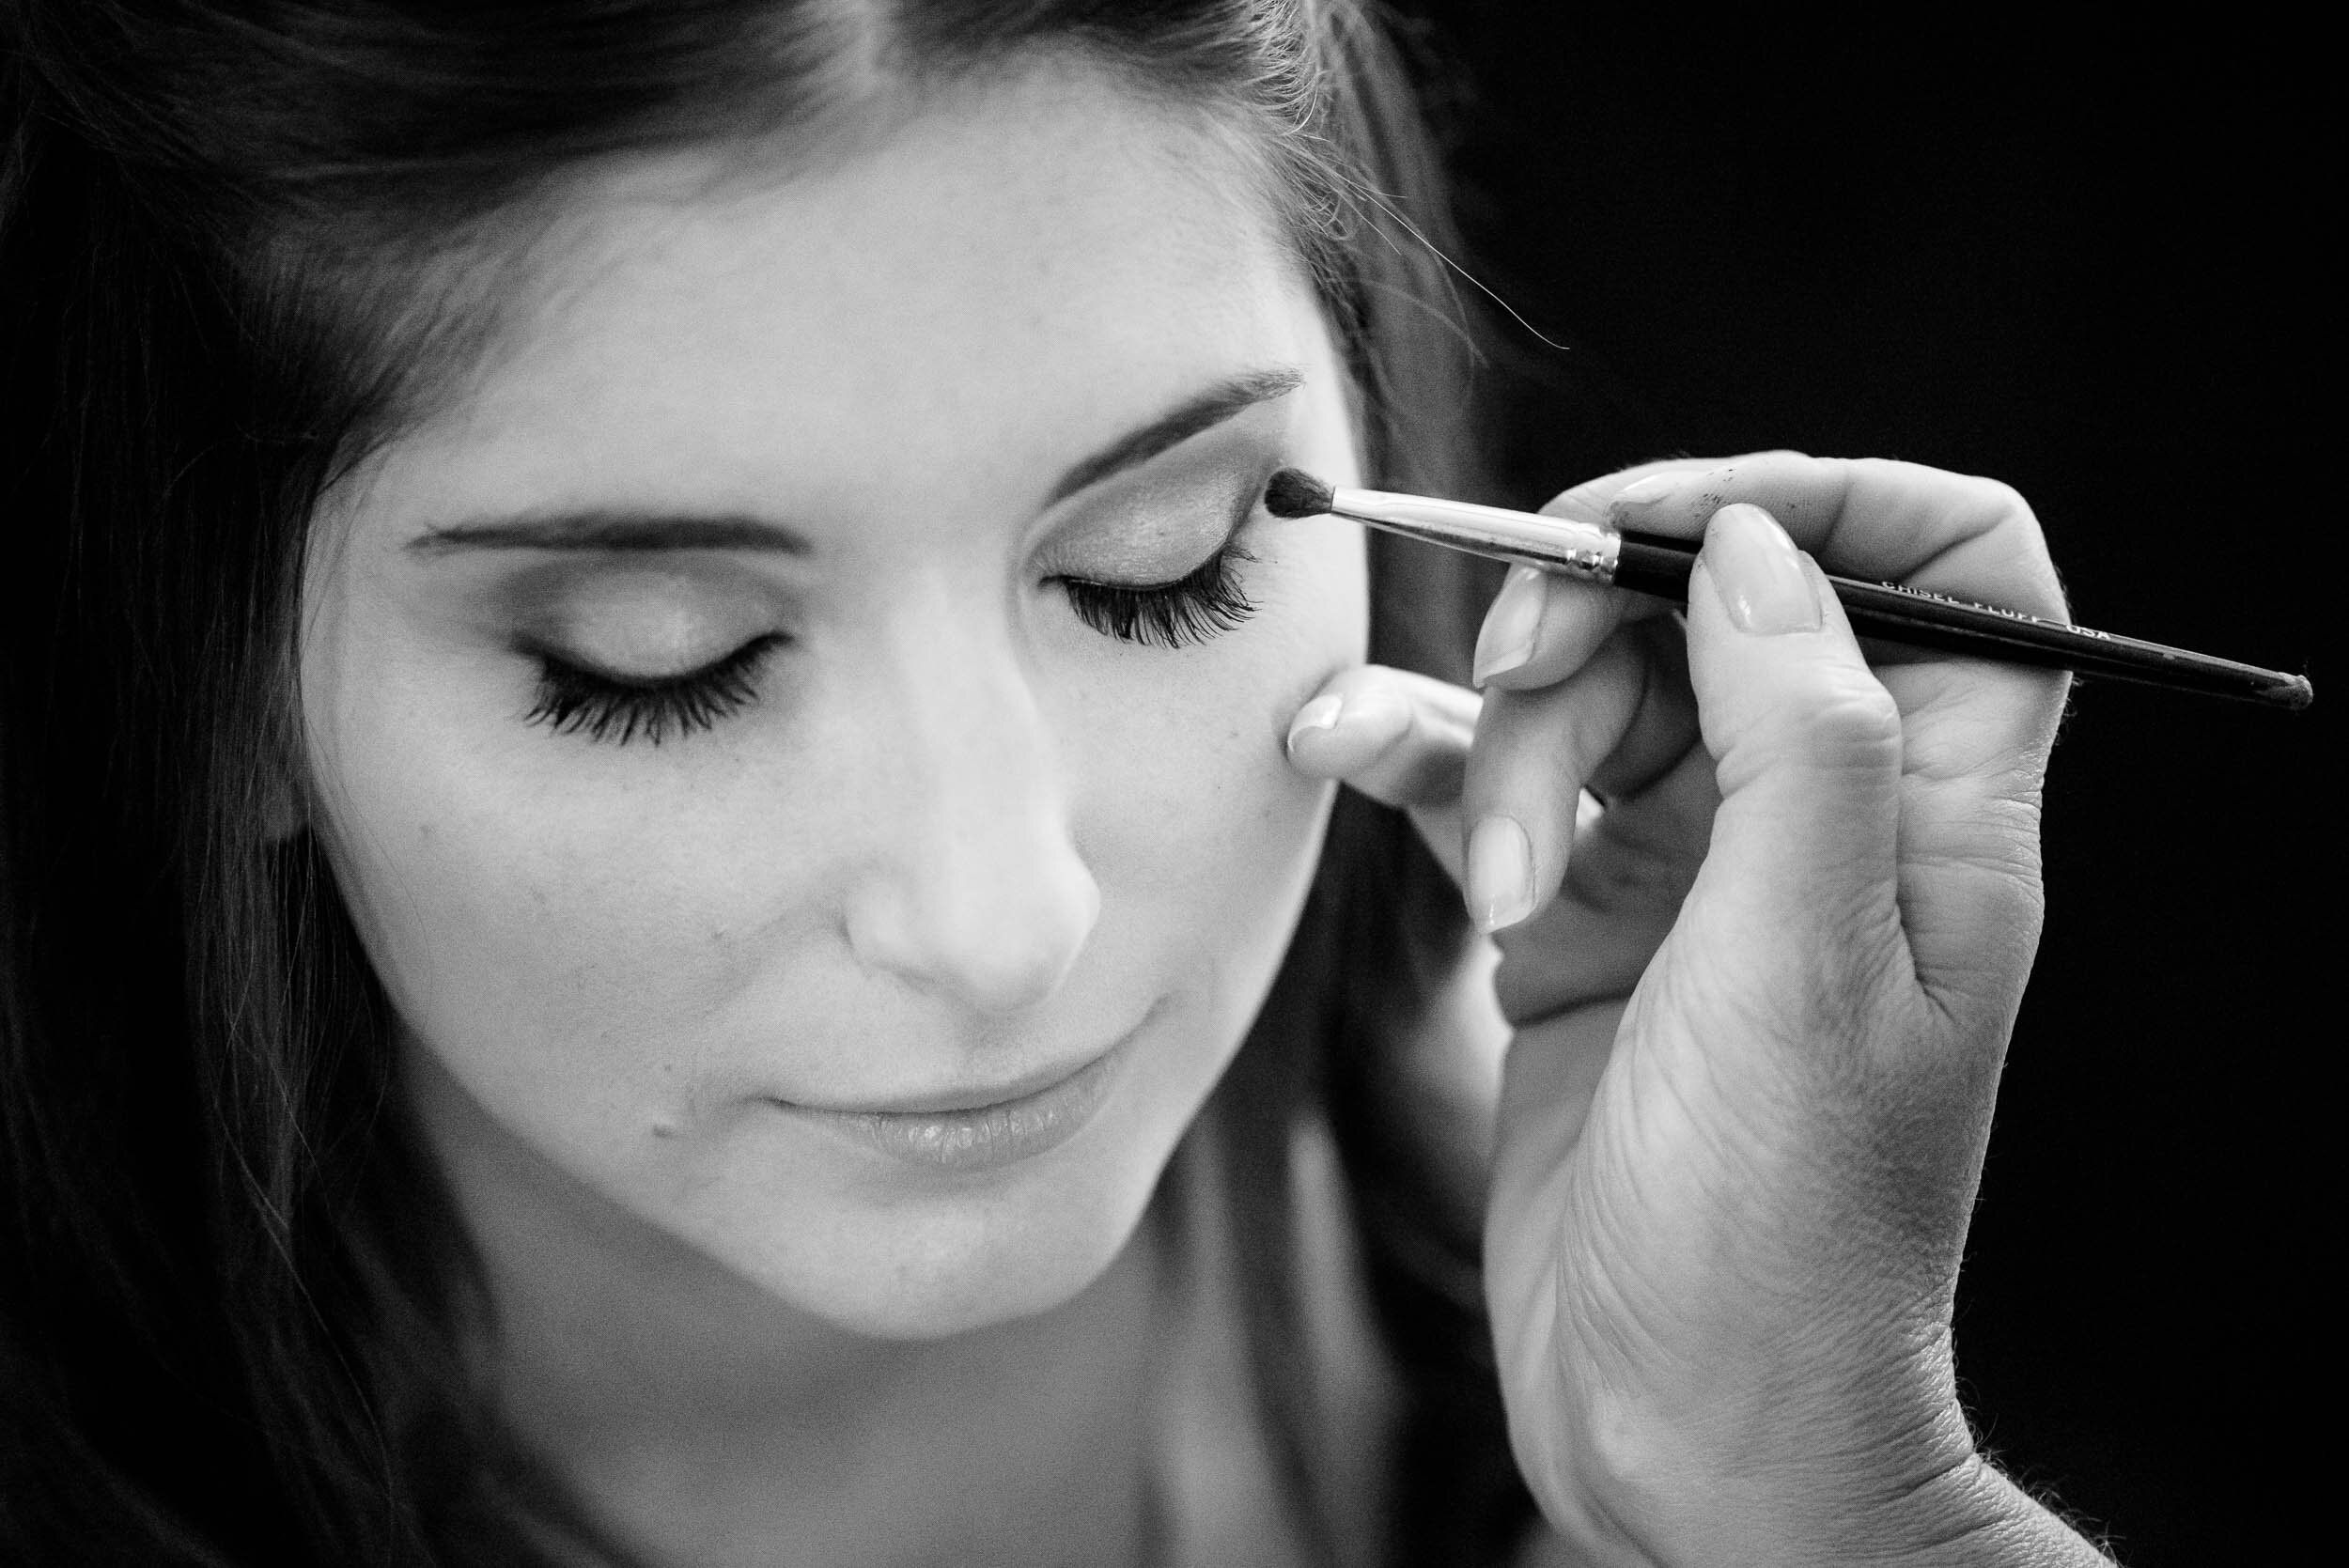 Bride getting ready on her wedding day:  Ravenswood Event Center Chicago wedding captured by J. Brown Photography.  